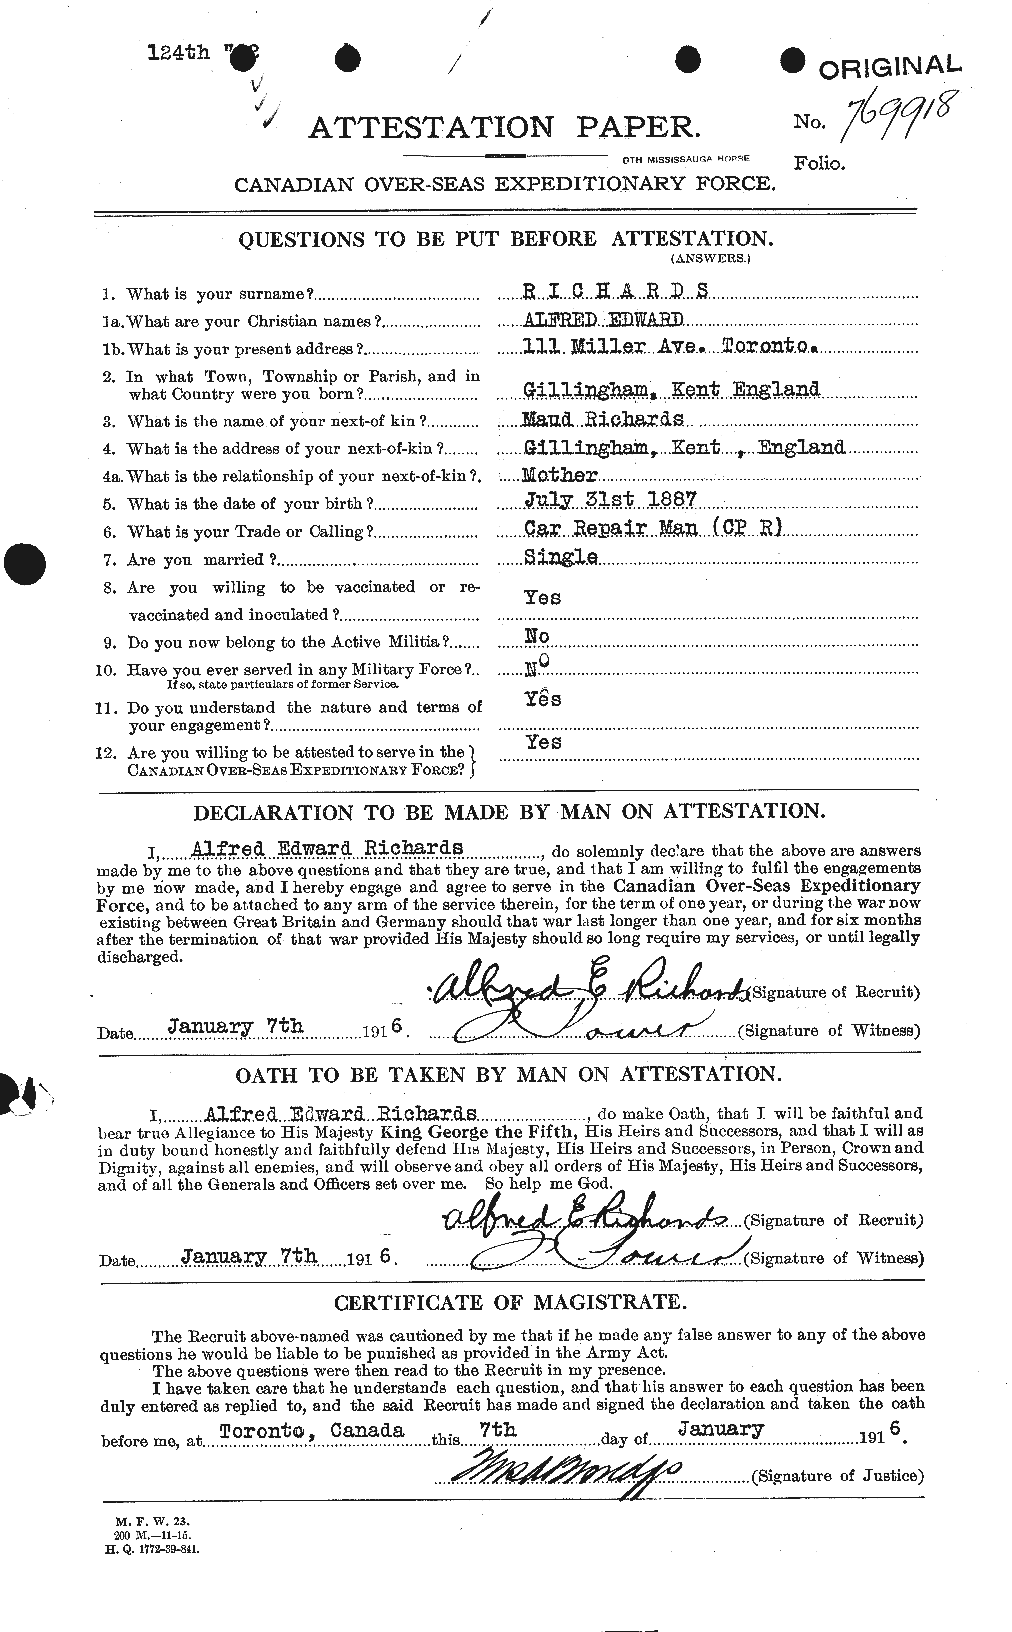 Personnel Records of the First World War - CEF 601652a